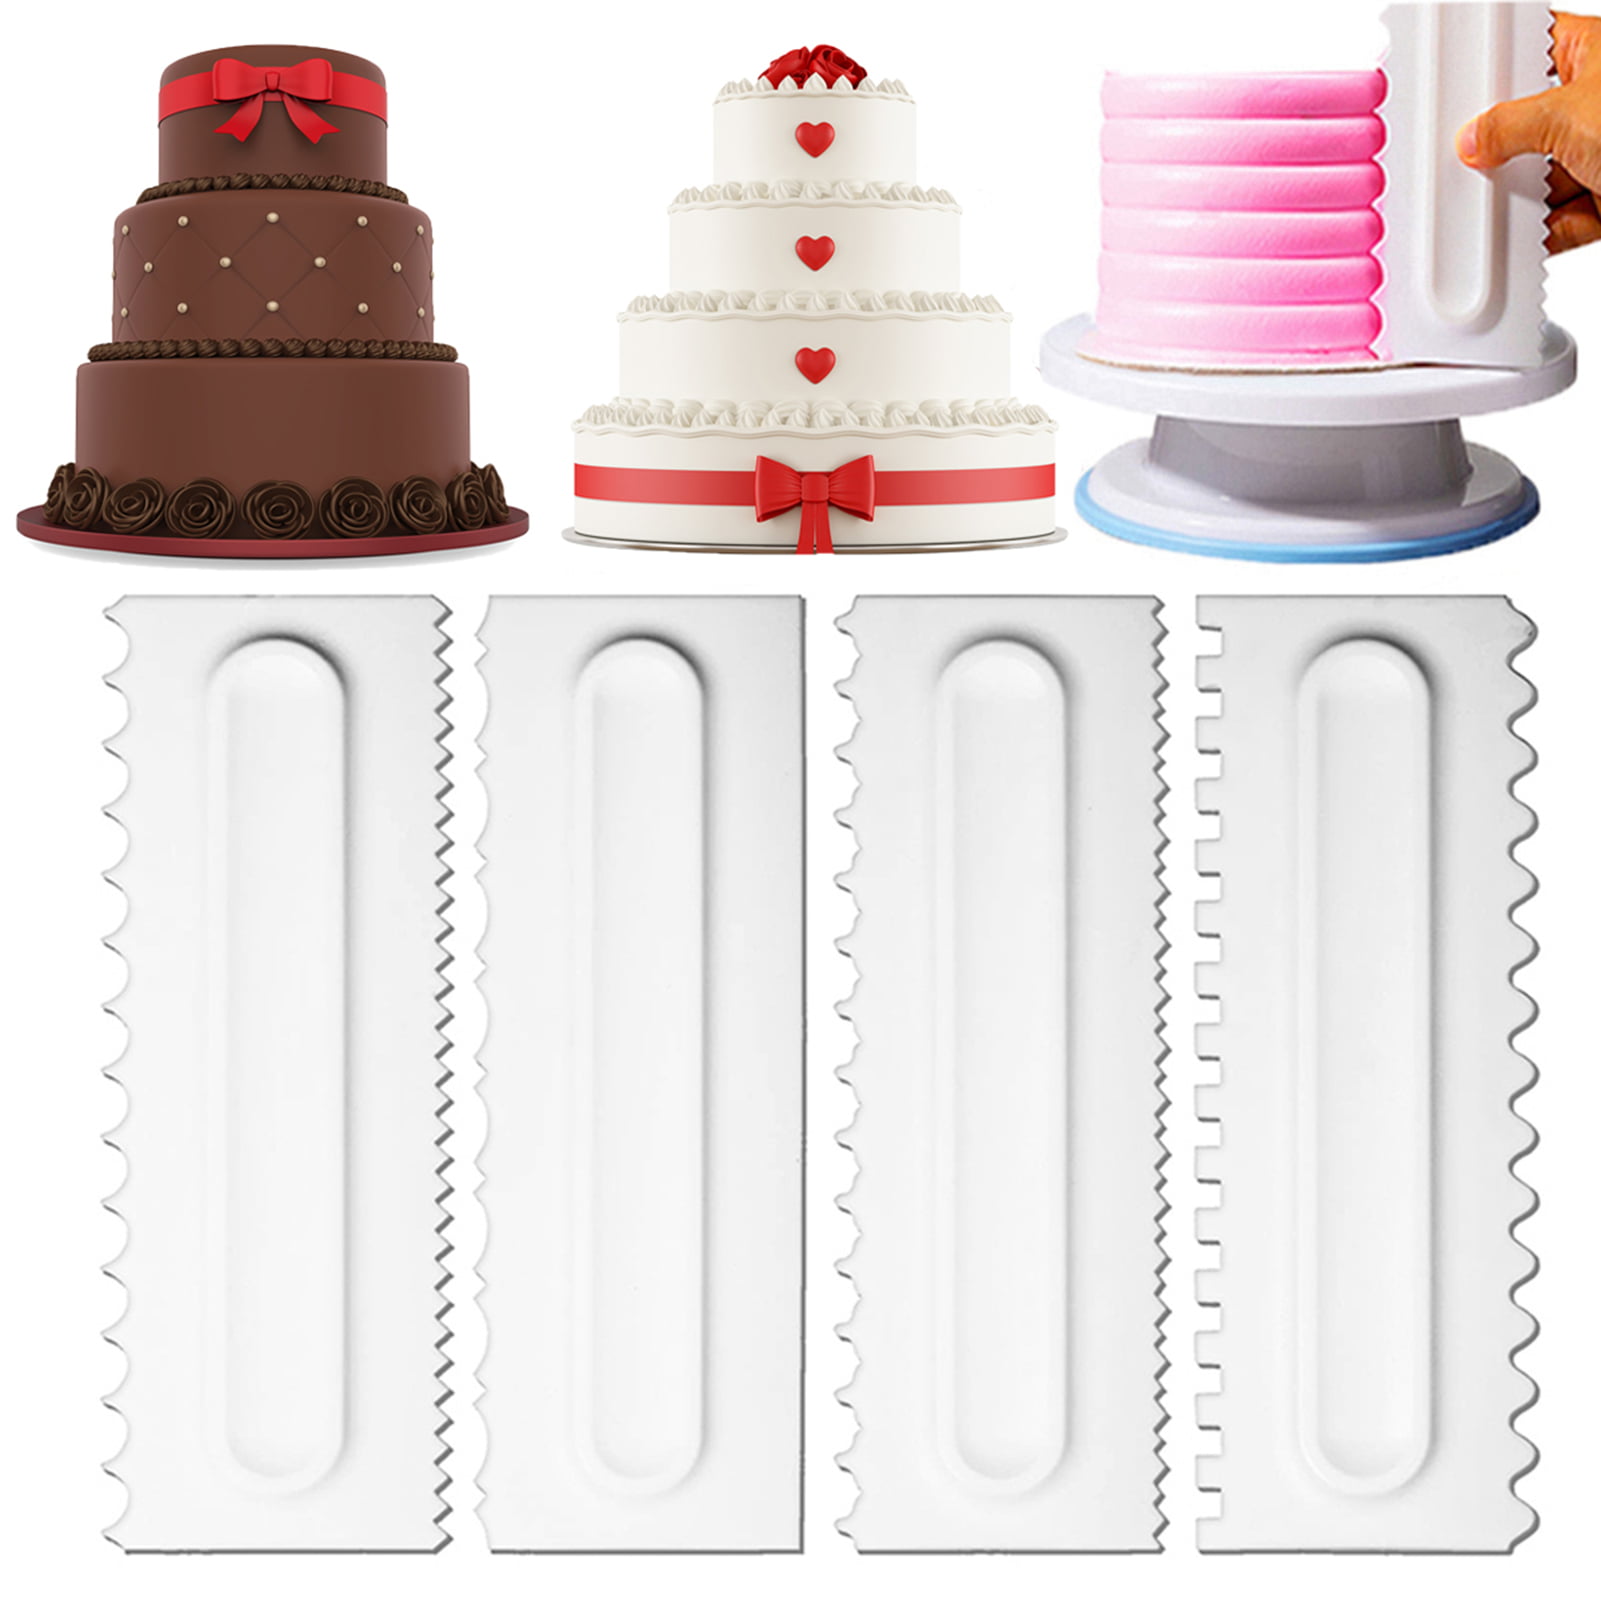 Details about   9pcs Cake Decorating Kits Cake Icing Tips Nozzles Pastry Bags Coupler Cleaning 